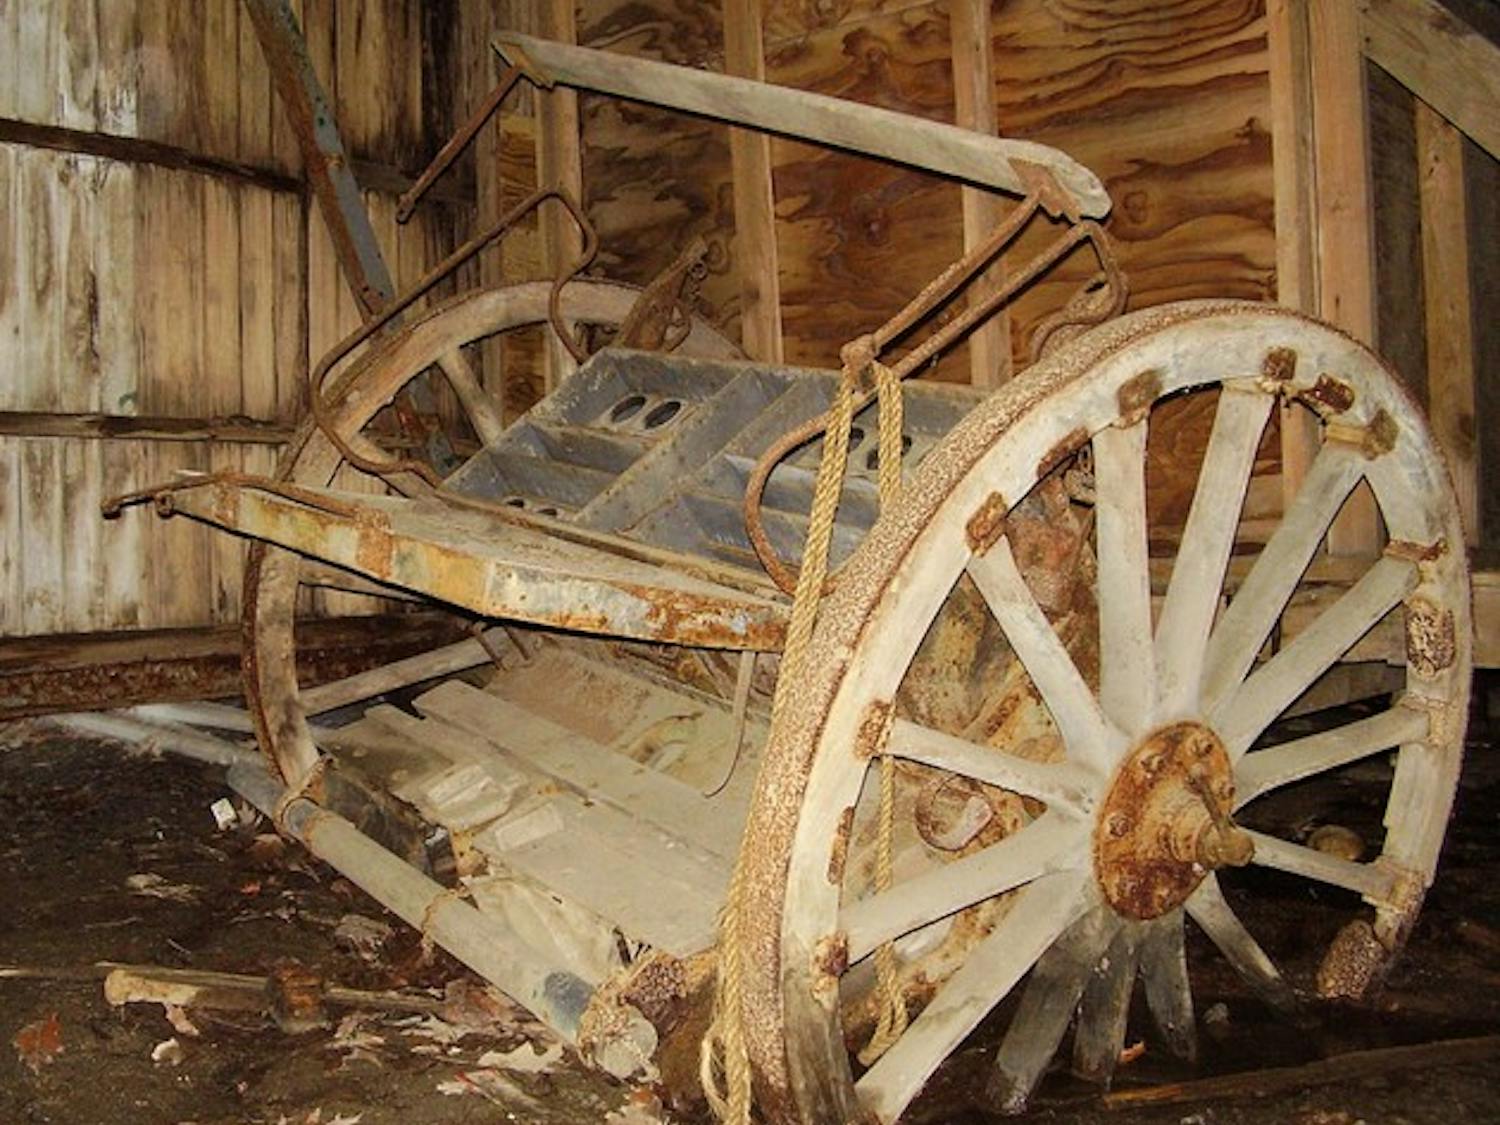 A Hanover Police officer found this antique ammunition carriage, rumored to go with a World War I cannon buried nearby, beneath Memorial Field.